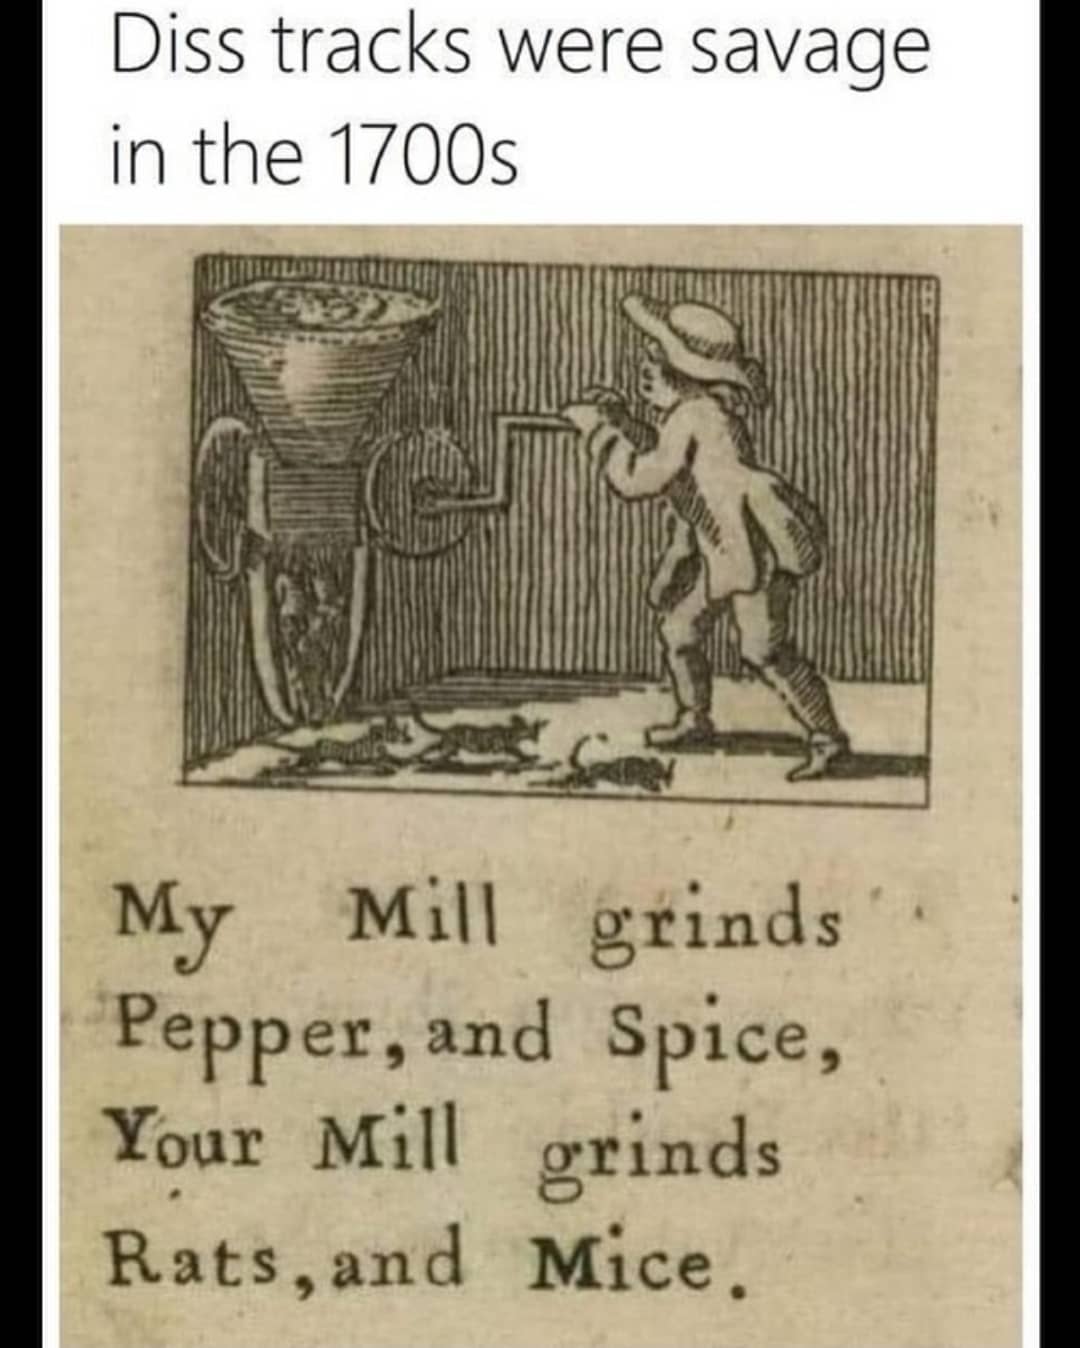 dank memes - antique diss track - Diss tracks were savage in the 1700s My Mill grinds Pepper, and Spice, Your Mill grinds Rats, and Mice.